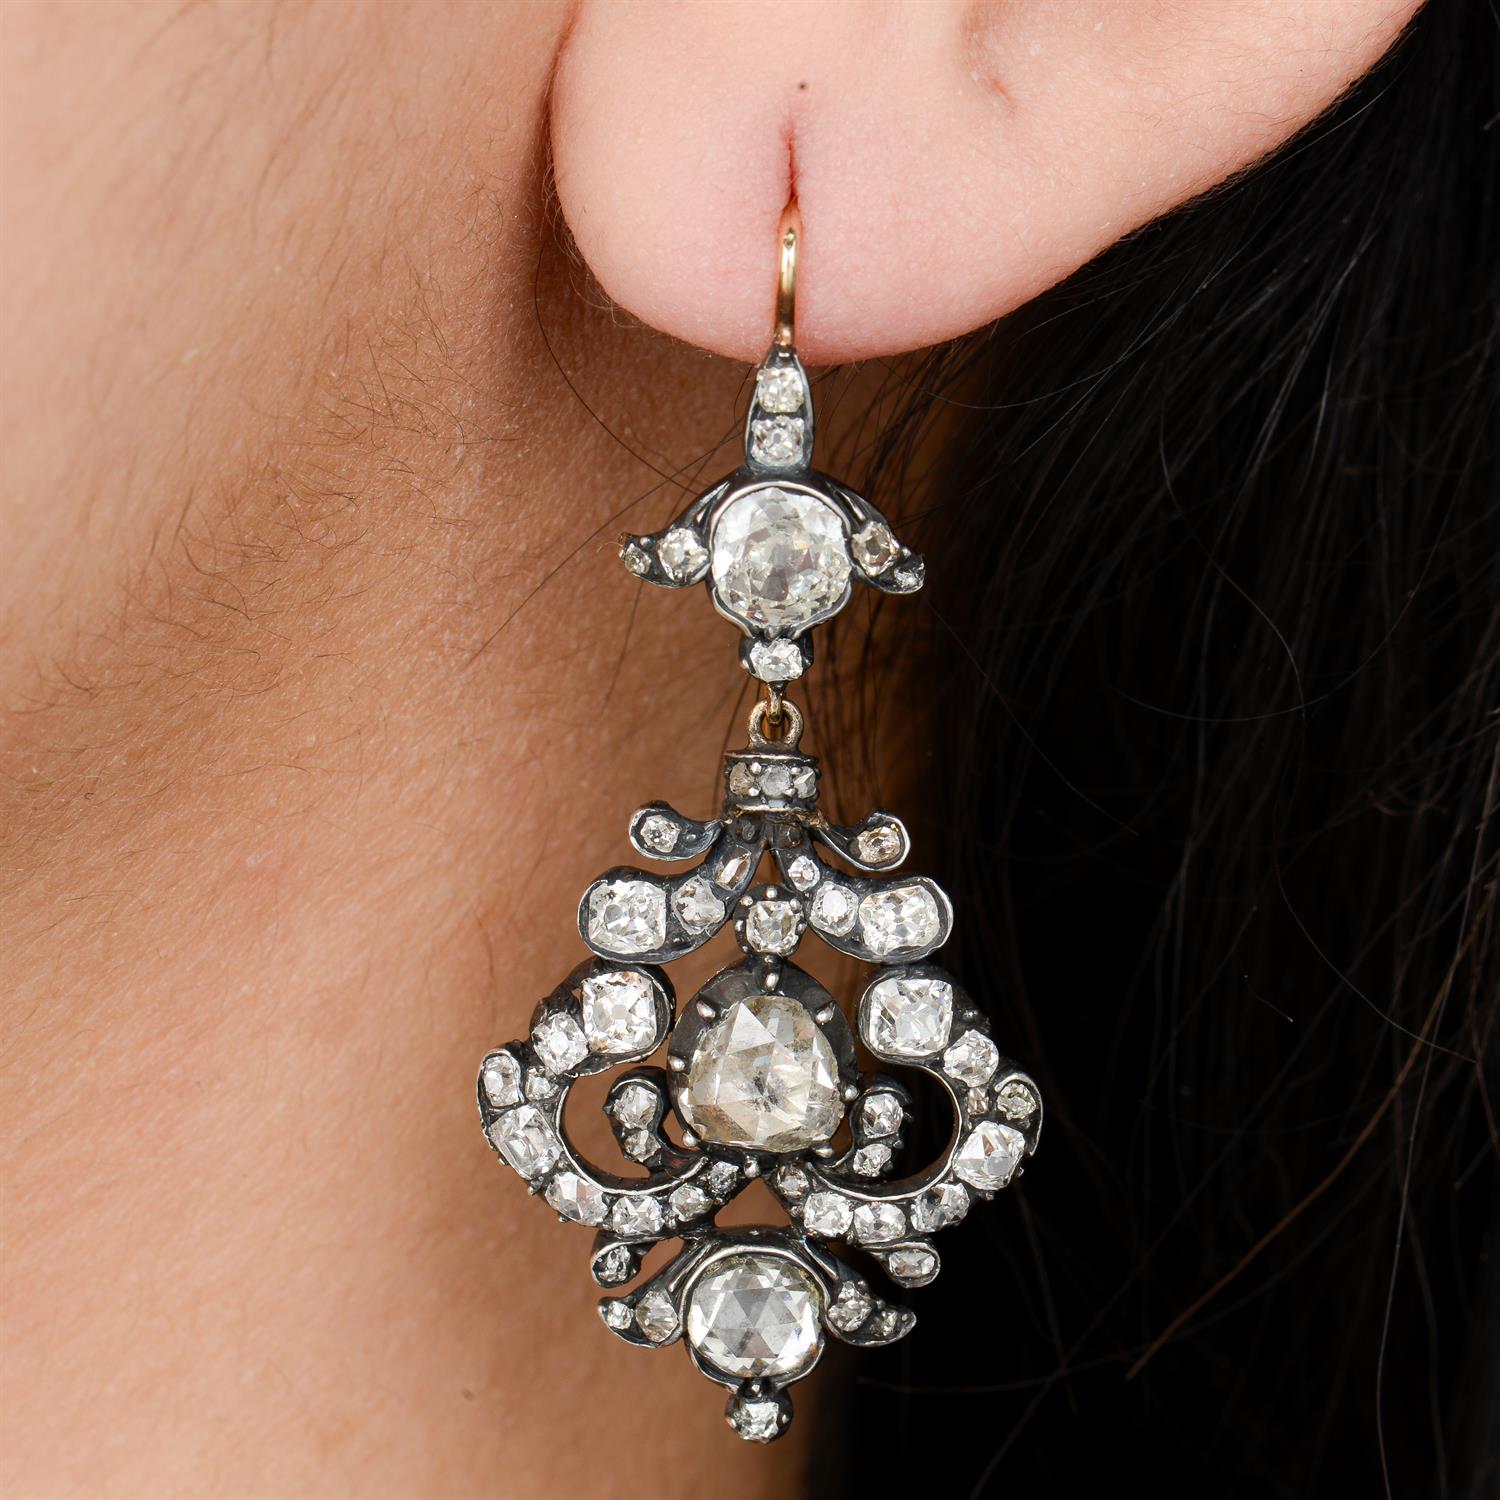 Old and rose-cut diamond earrings